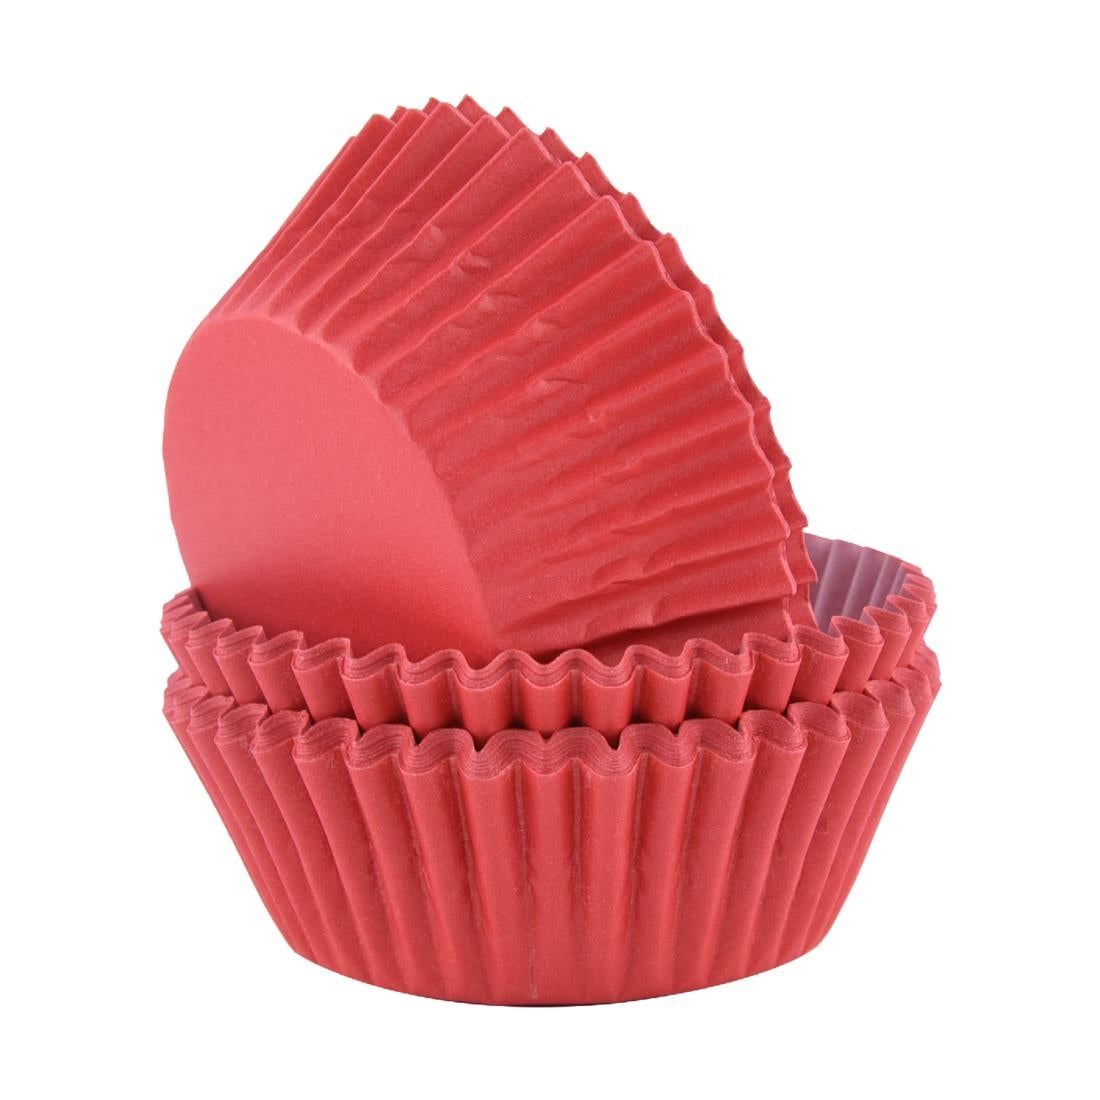 CX138 PME Block Colour Cupcake Cases Red, Pack of 60 JD Catering Equipment Solutions Ltd